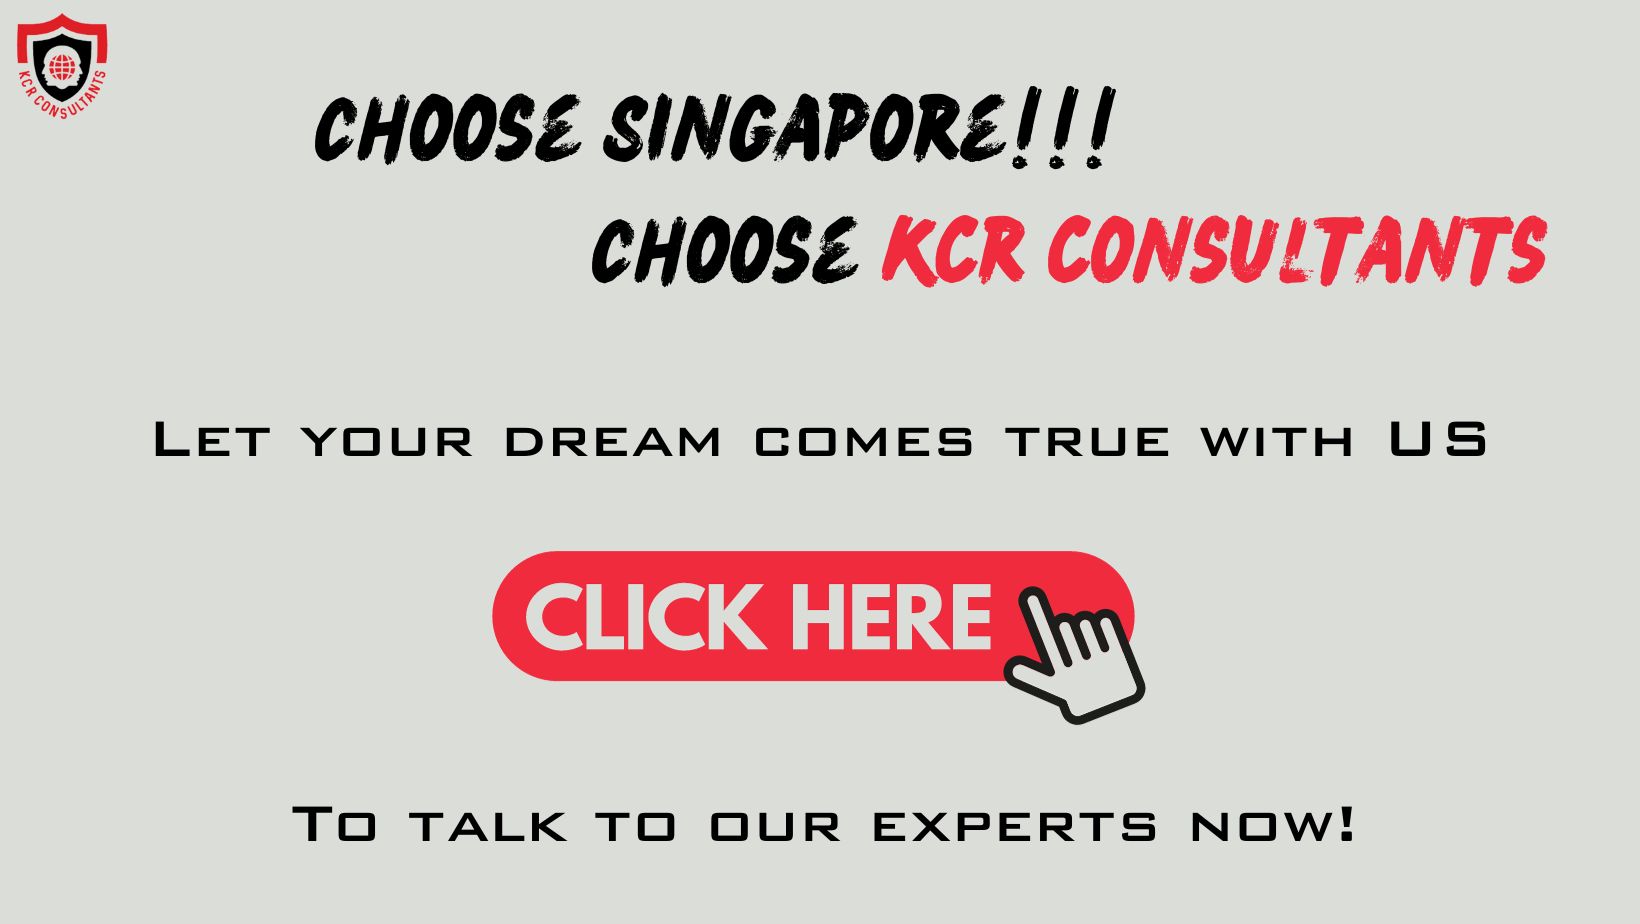 Study in Singapore - KCR CONSULTANTS - Contact us